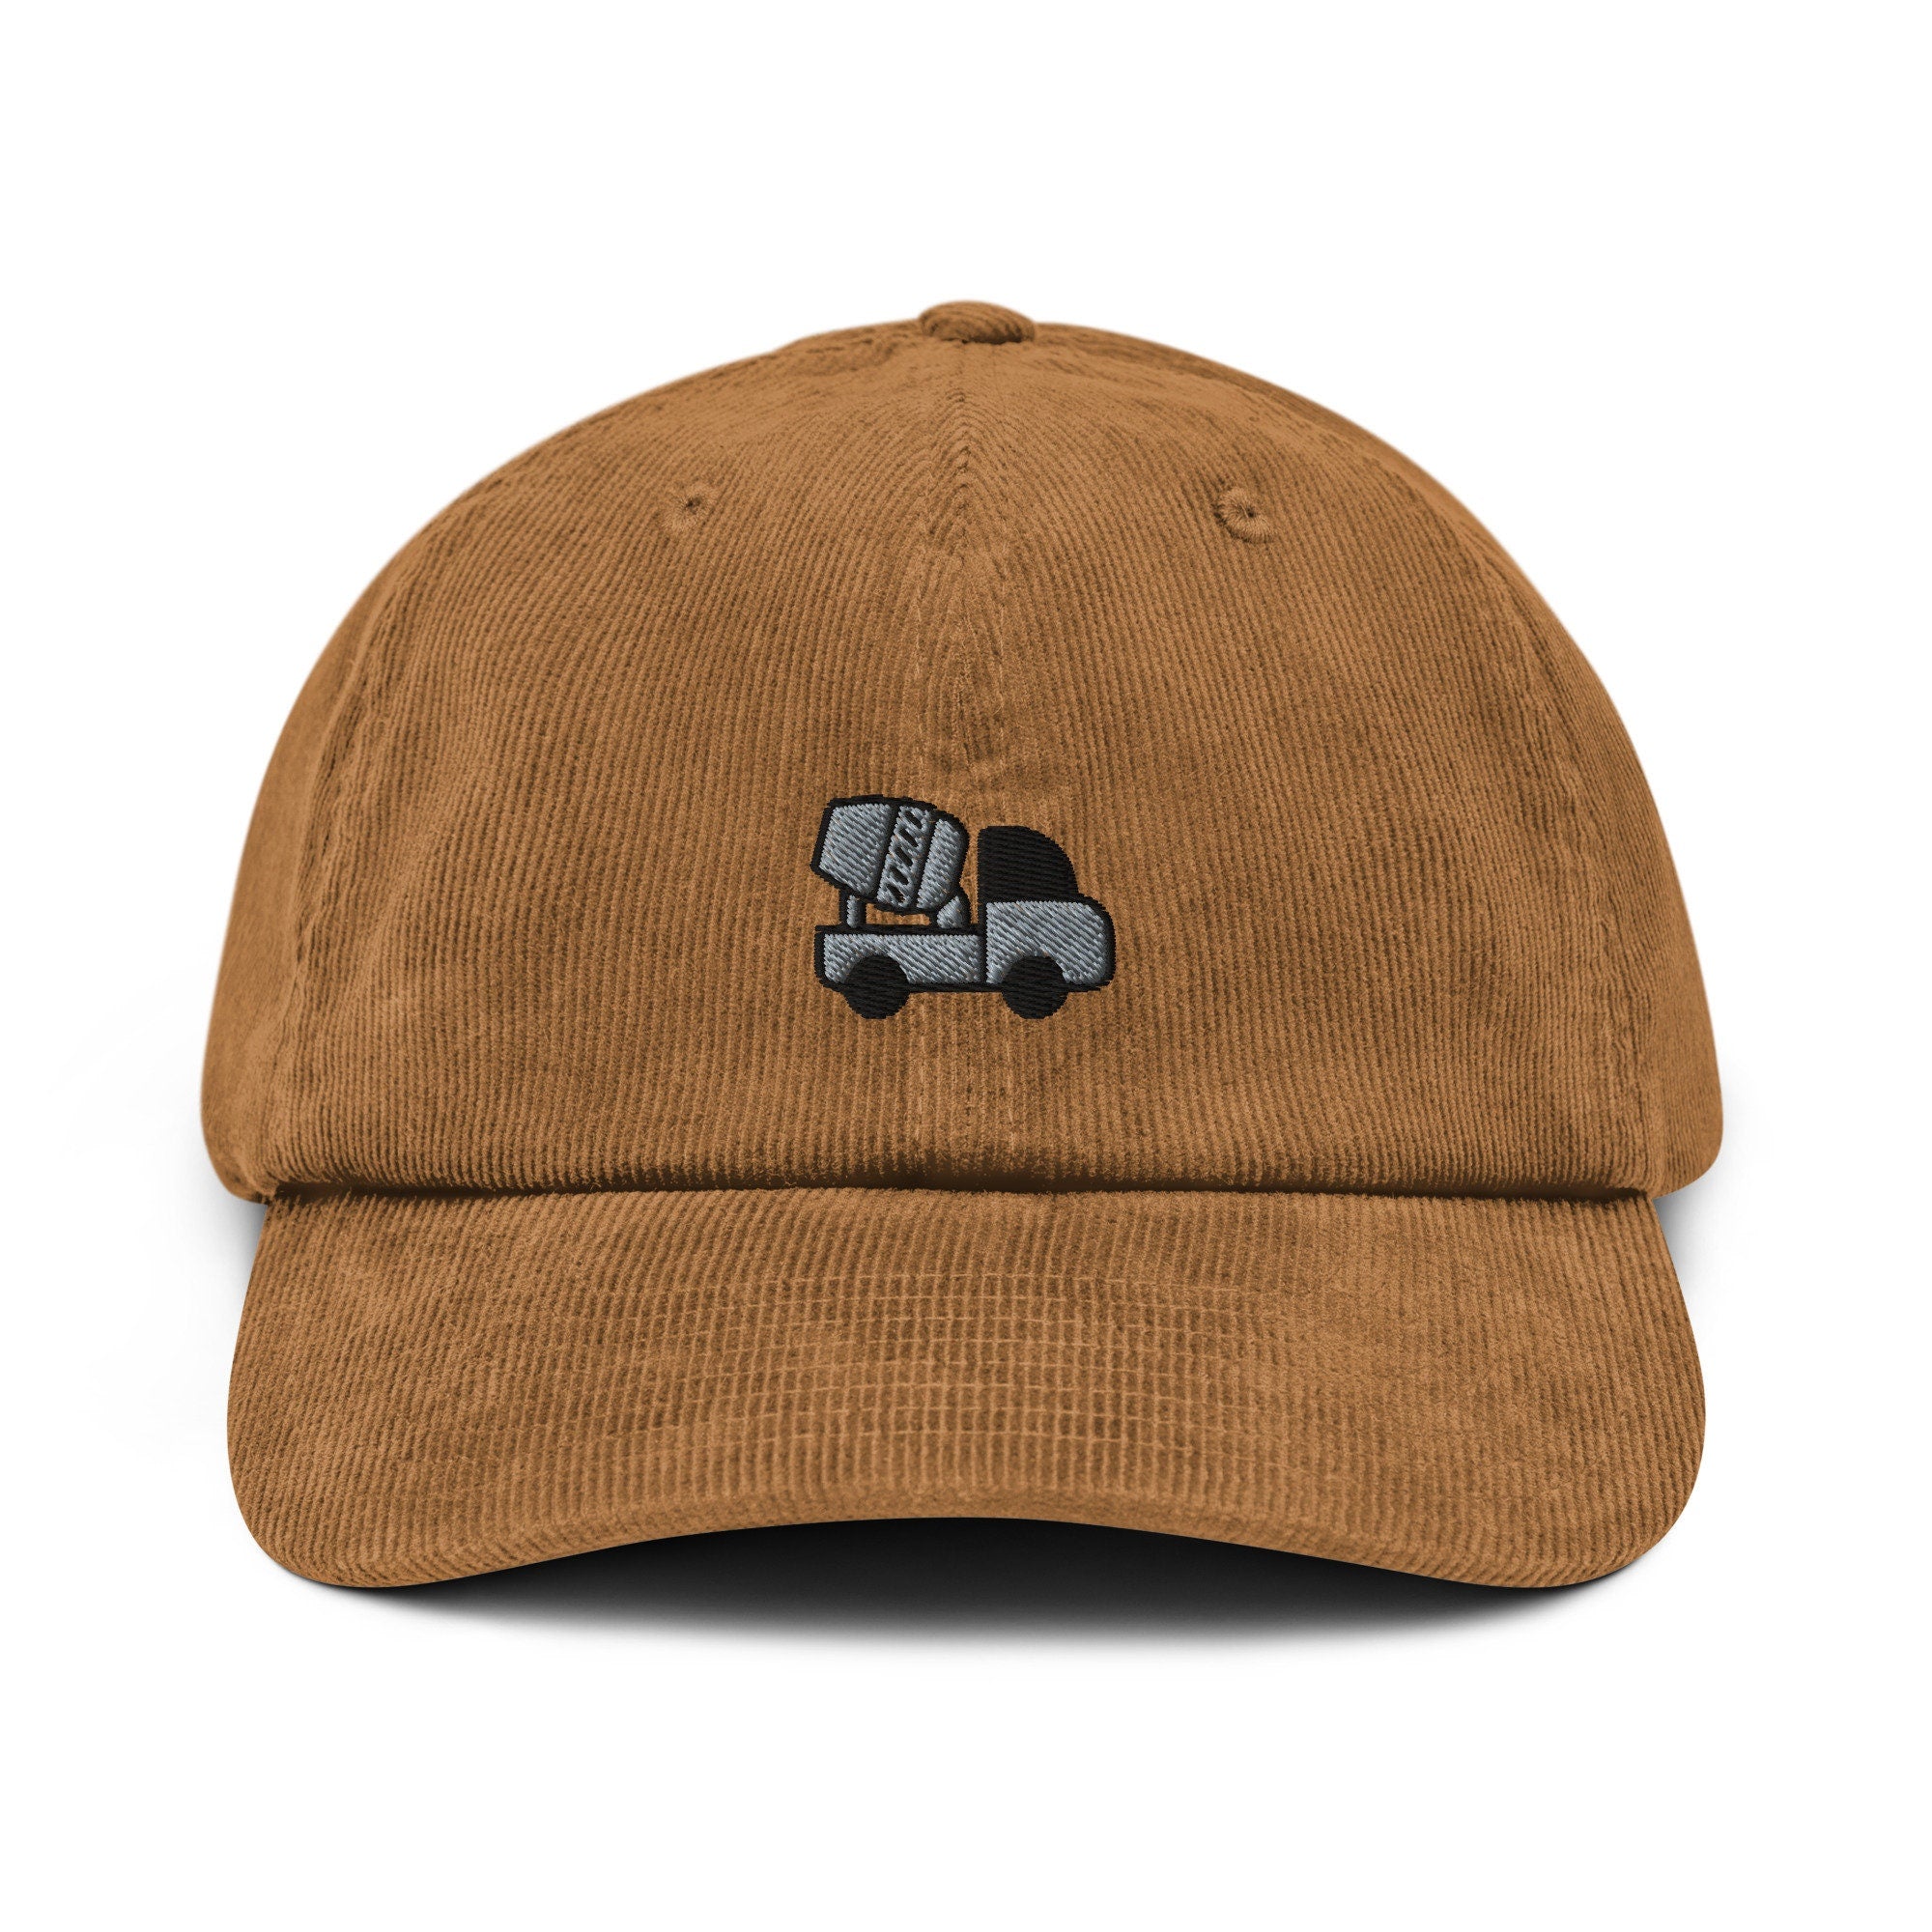 Cement Mixer Corduroy Hat, Handmade Embroidered Corduroy Dad Cap - Multiple Colors